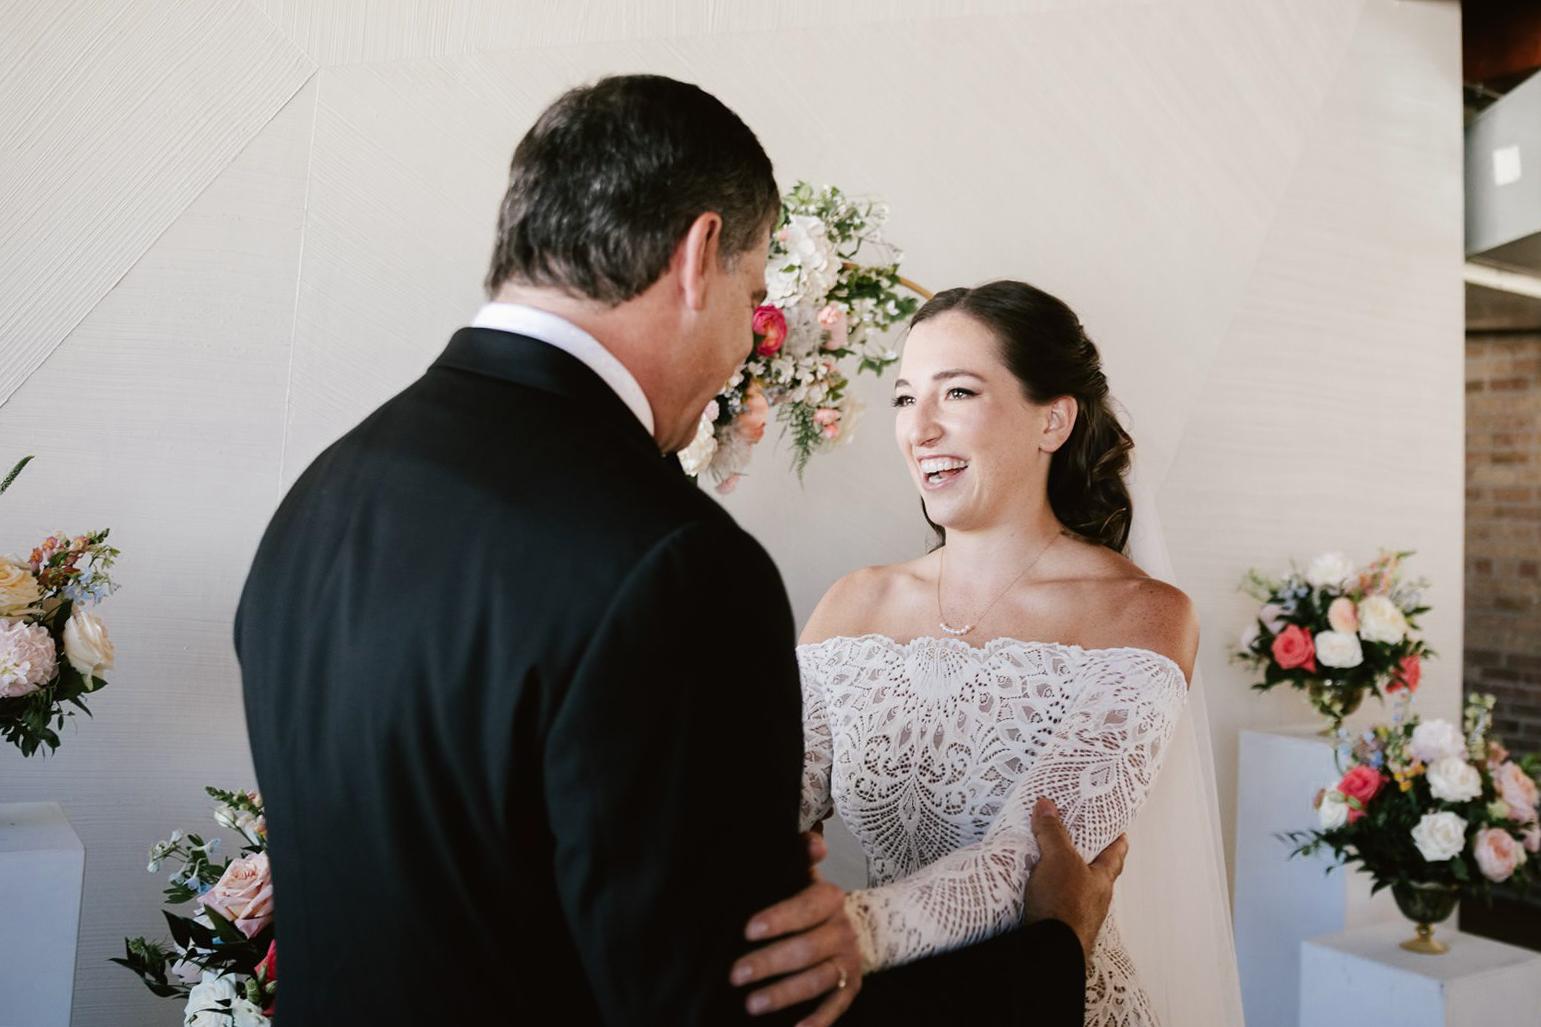 he emotional first look: Bride shares a heartfelt moment with her father at Walden Chicago before the ceremony.